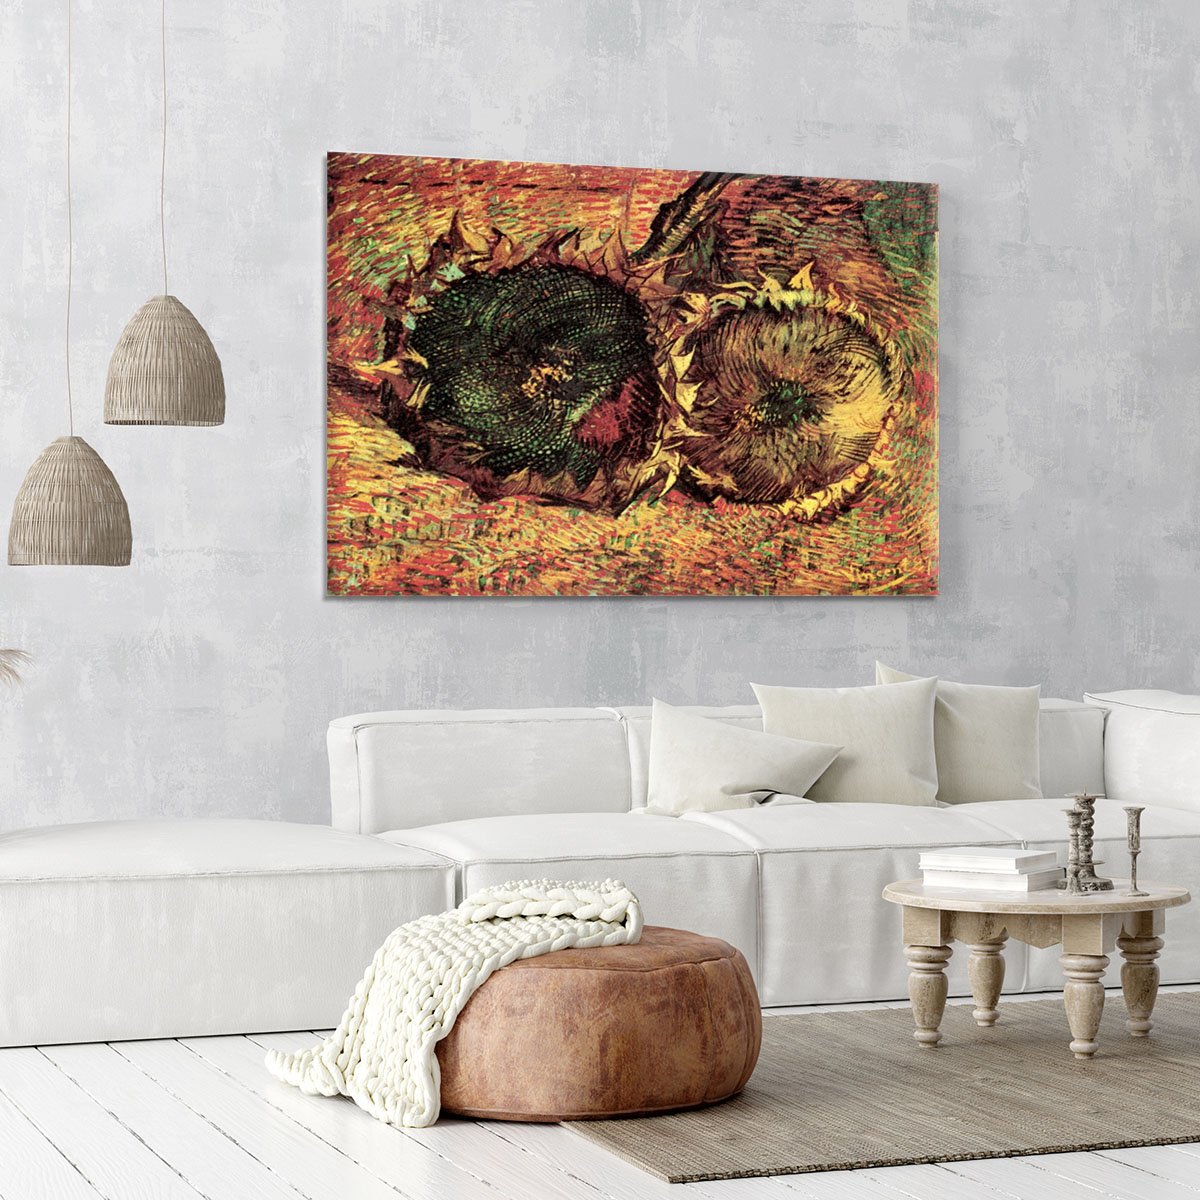 Two Cut Sunflowers 2 by Van Gogh Canvas Print or Poster